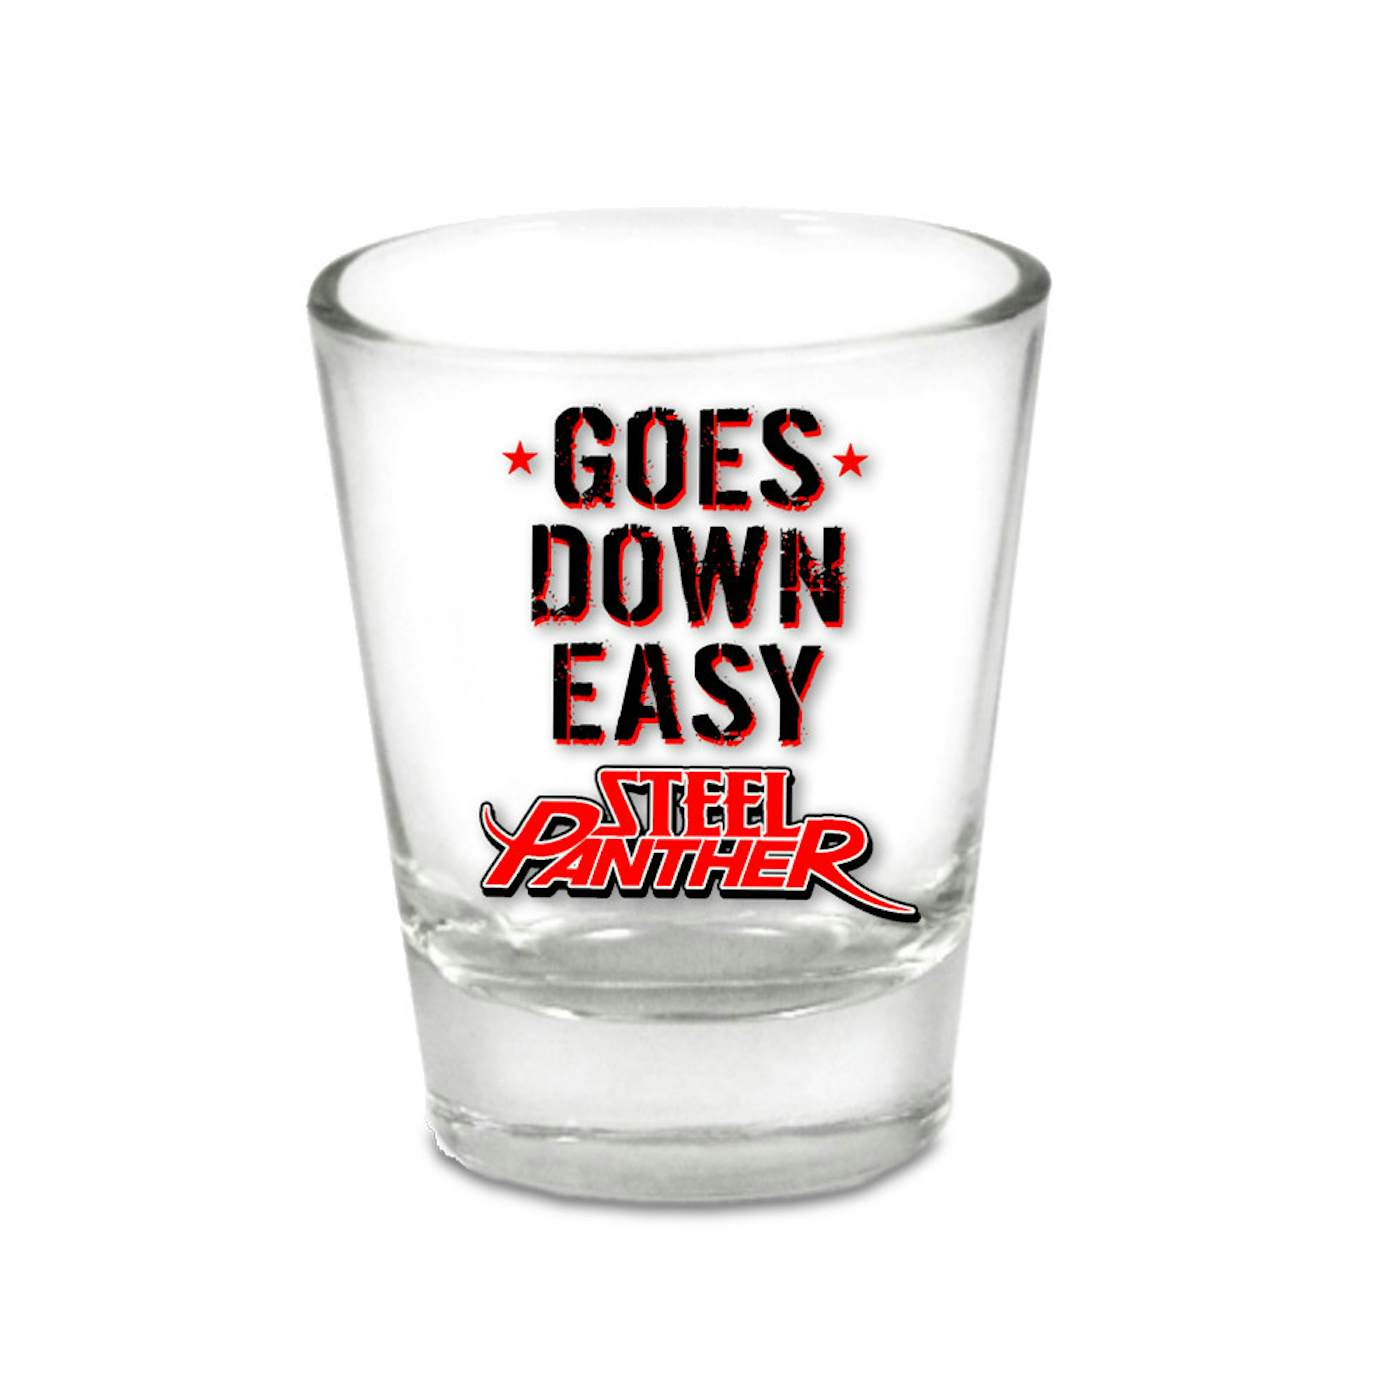 Steel Panther Shot Glass